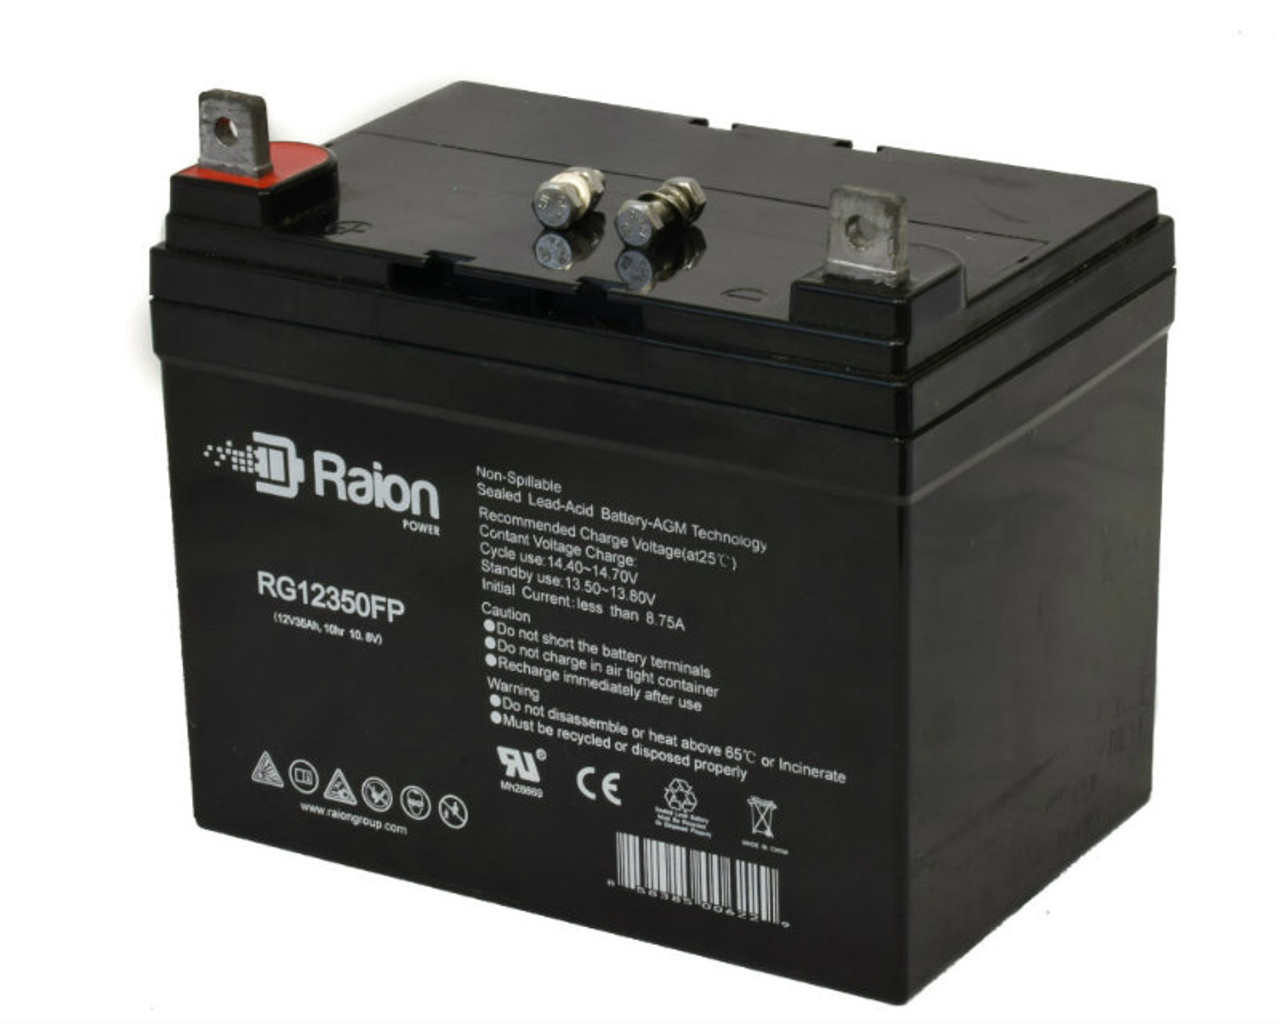 Raion Power Replacement 12V 35Ah Battery for Dixon 4426 - 1 Pack